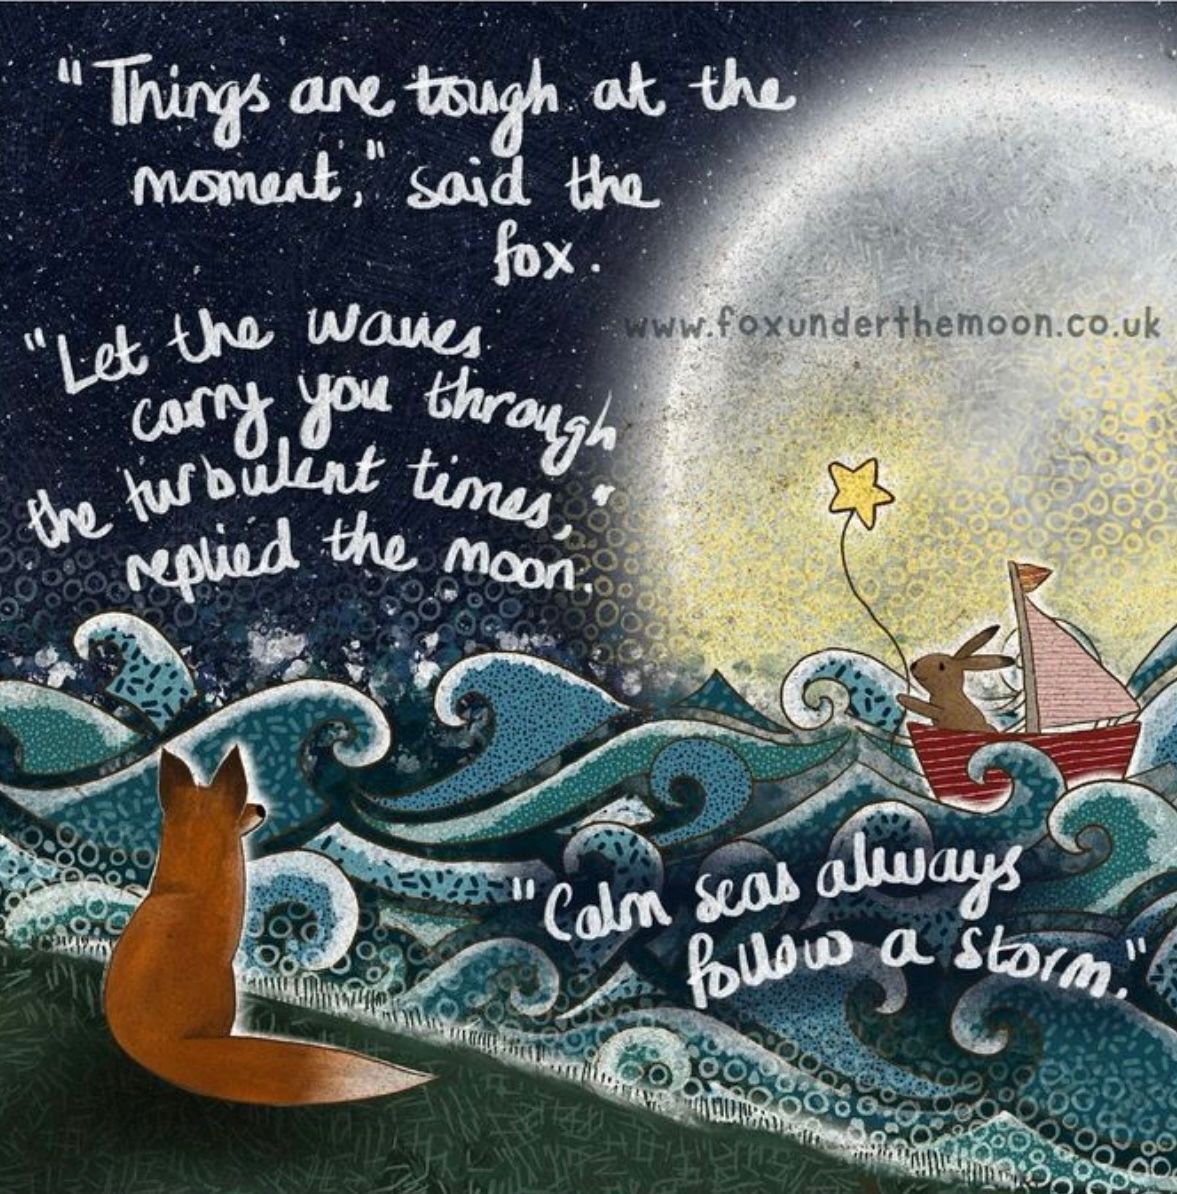 'Things are tough at the moment,' said the fox. 'Let the waves carry you through the turbulent times,' replied the moon, 'calm seas always follow a storm.'